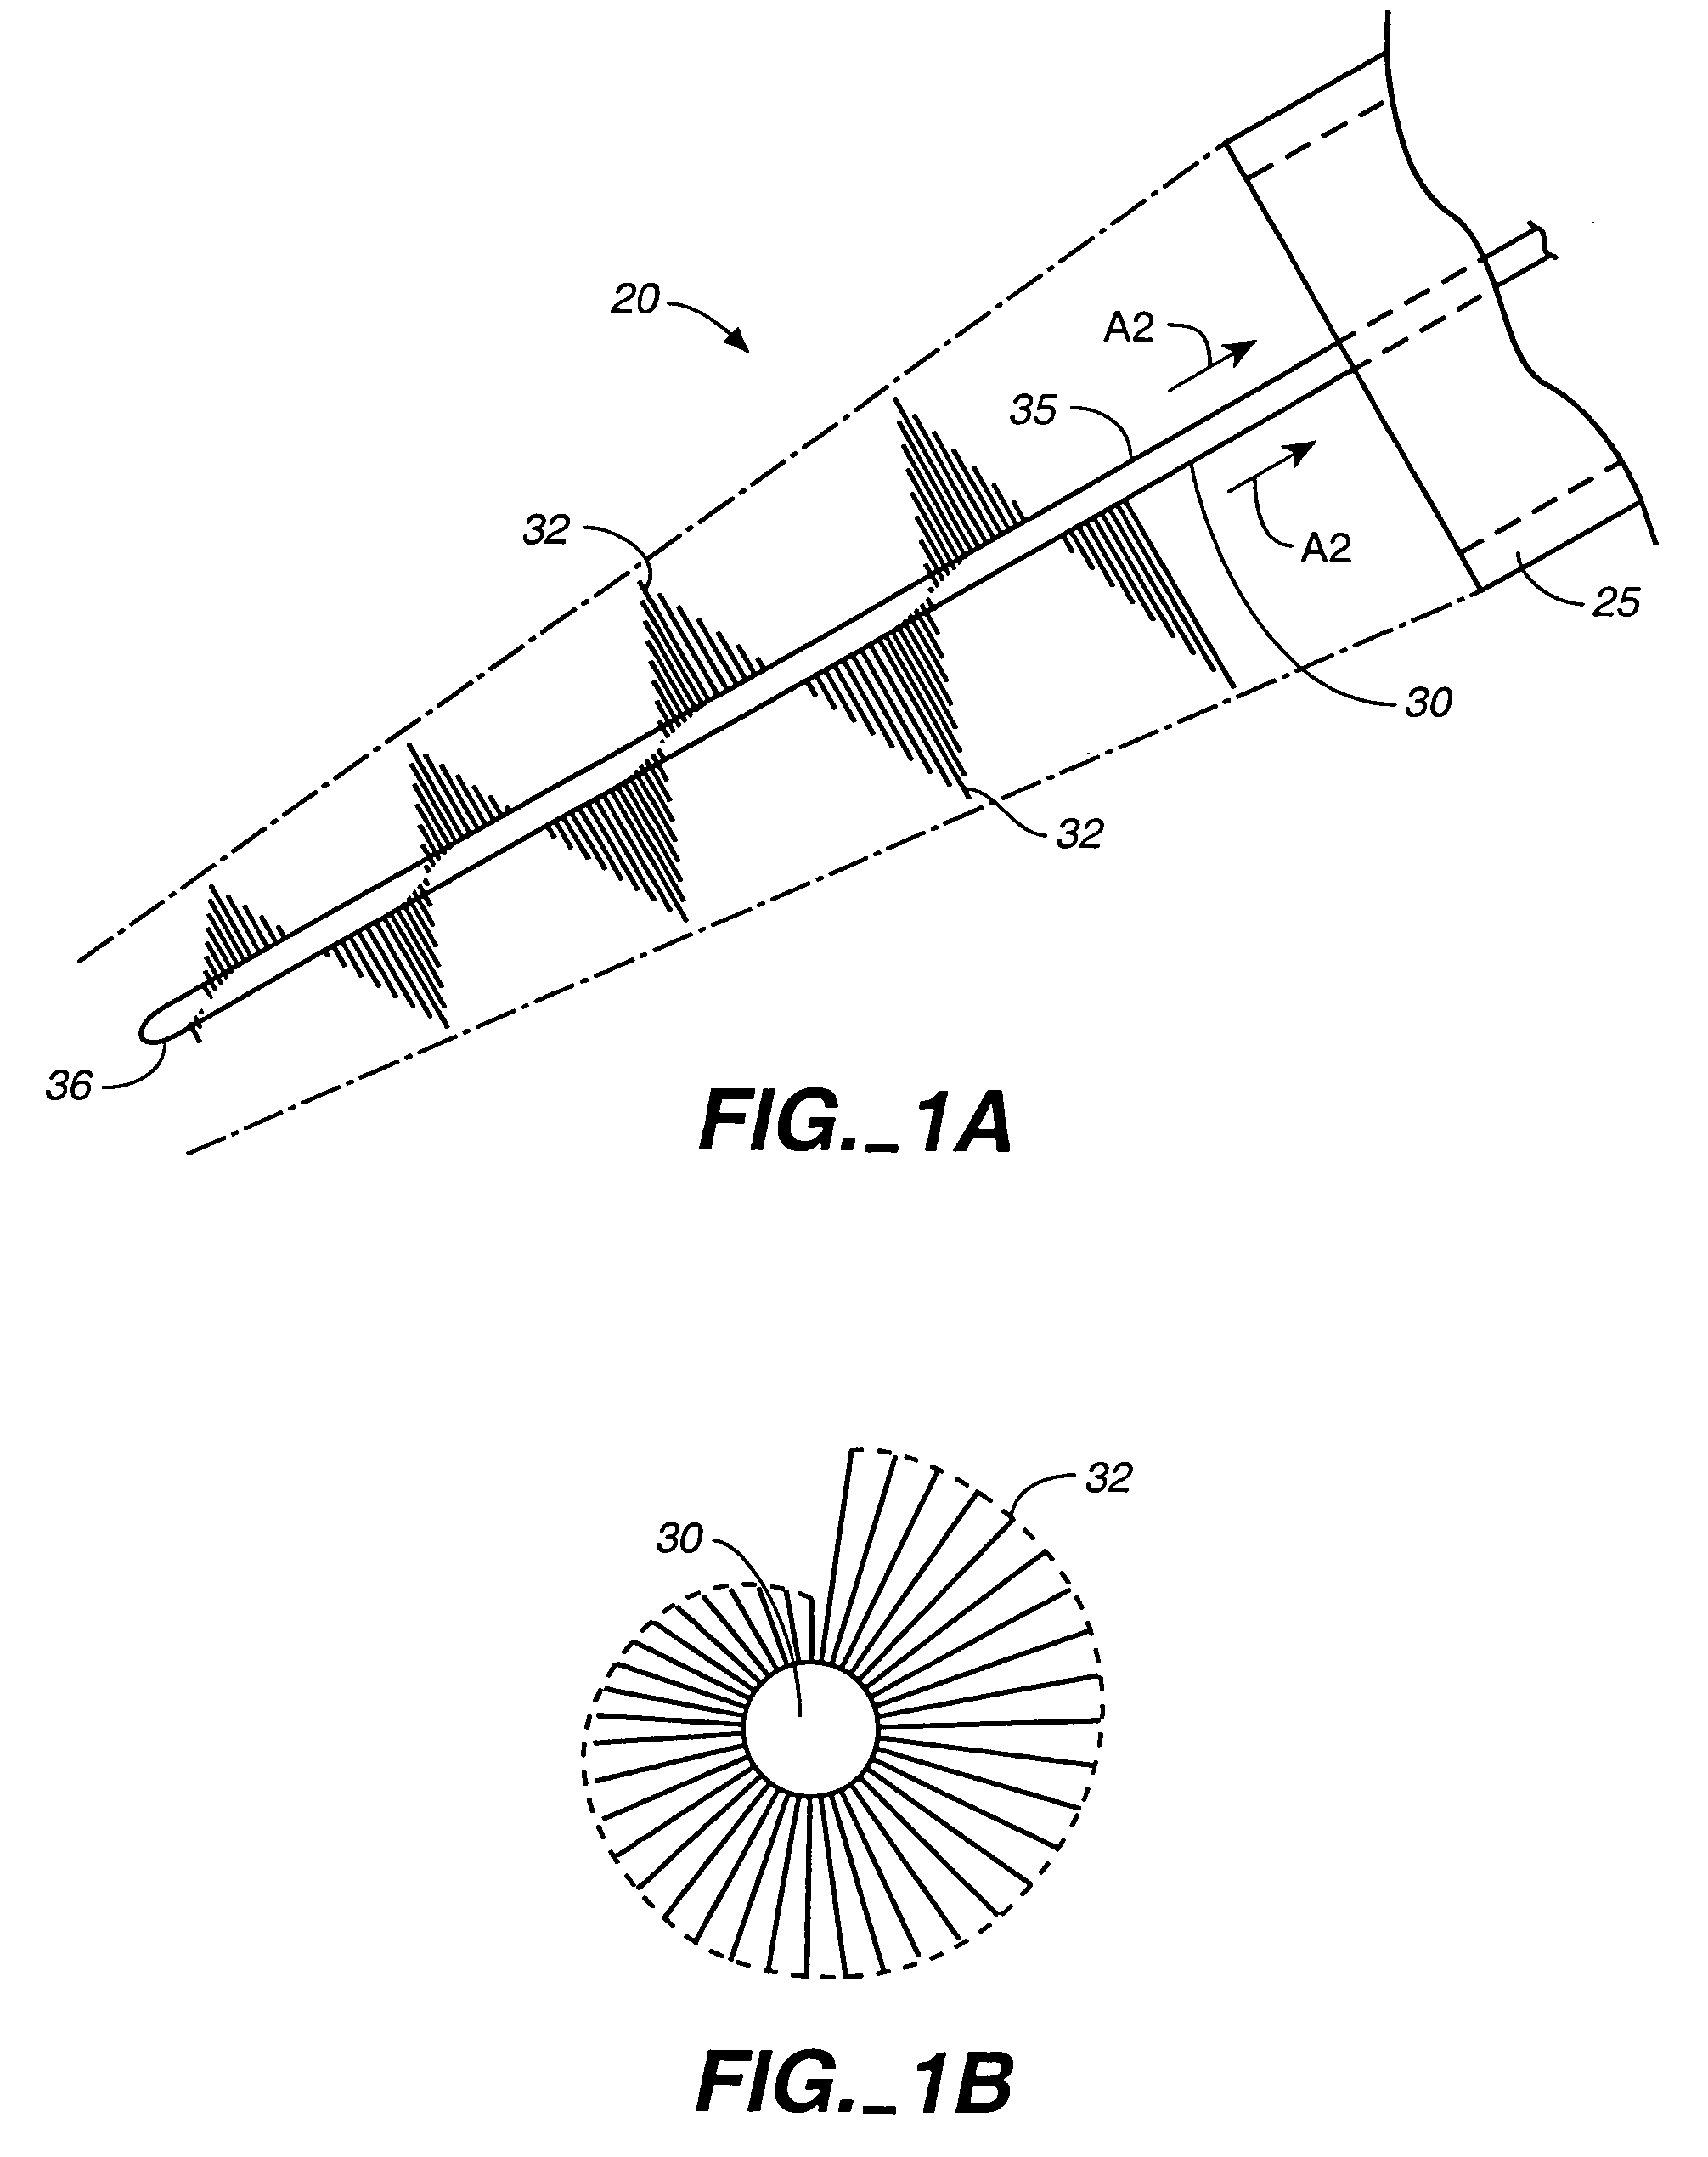 Intravascular material removal device